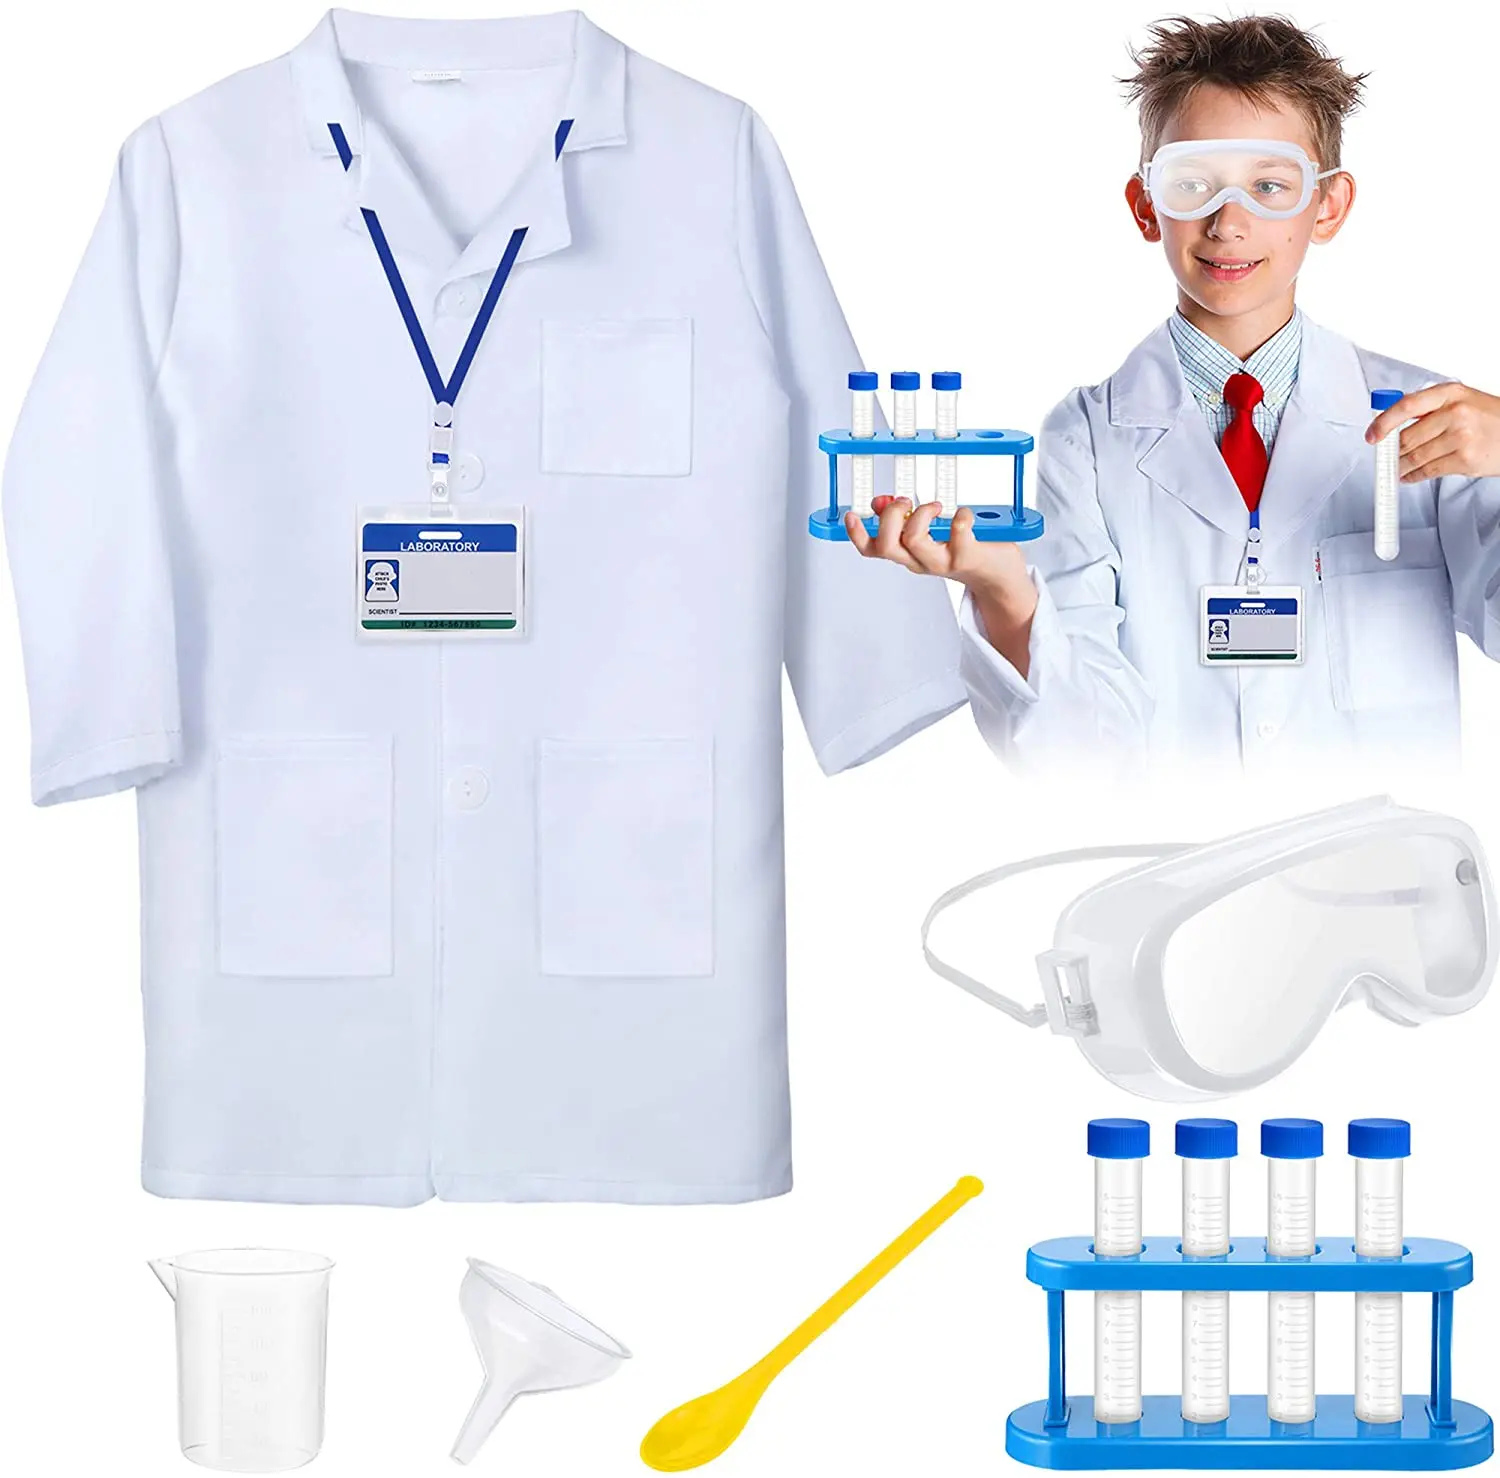 
Wholesale 11 Pieces Kids Dress Up Lab Costume Scientist Costume Accessory For Boys Girls Science Experiment Role Play  (1600131044139)